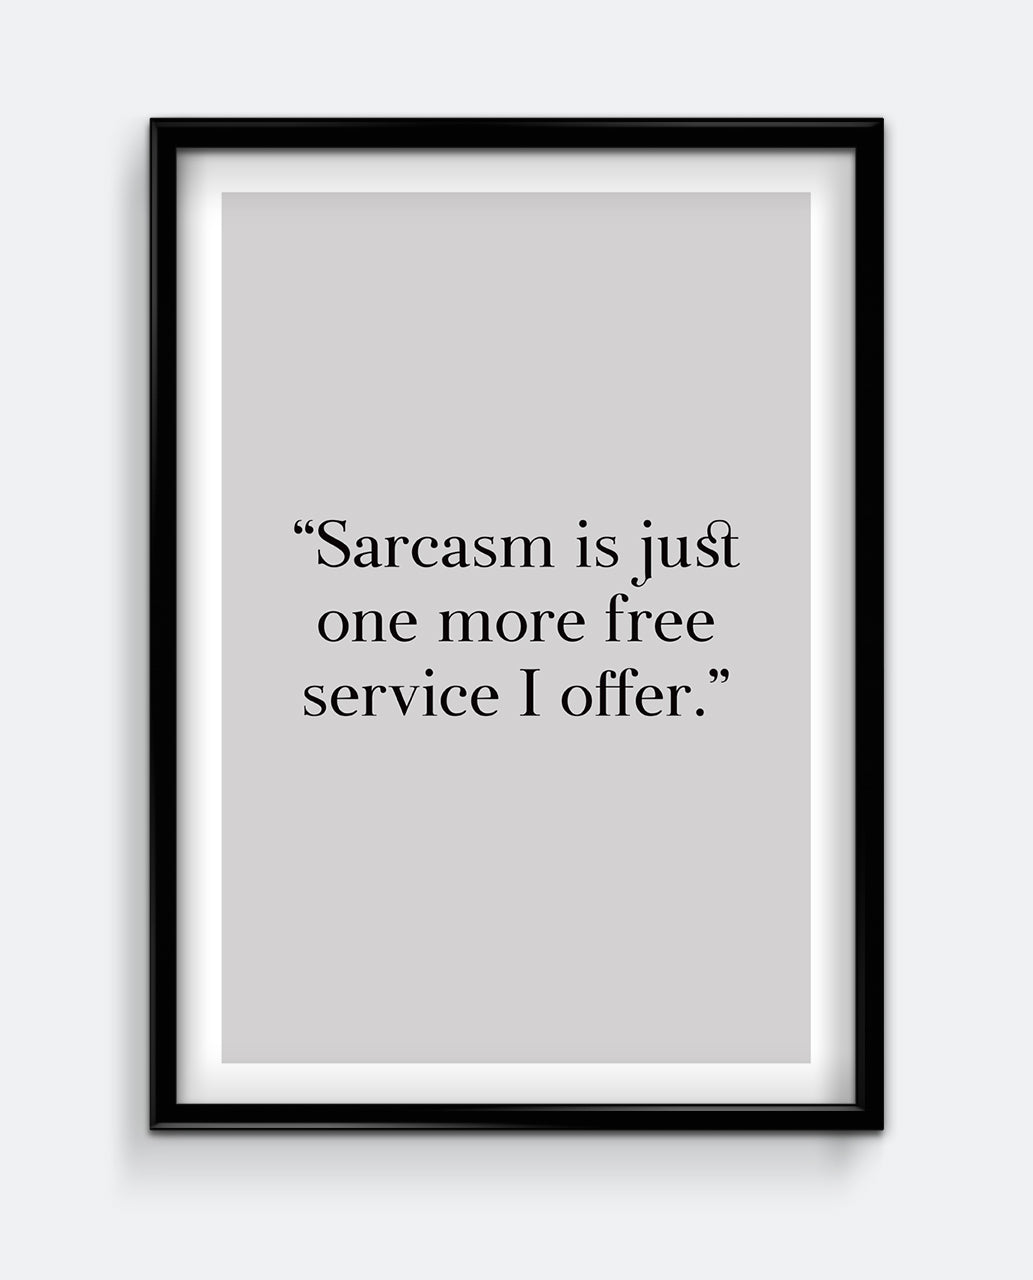 Sarcasm is just one more free service I offer